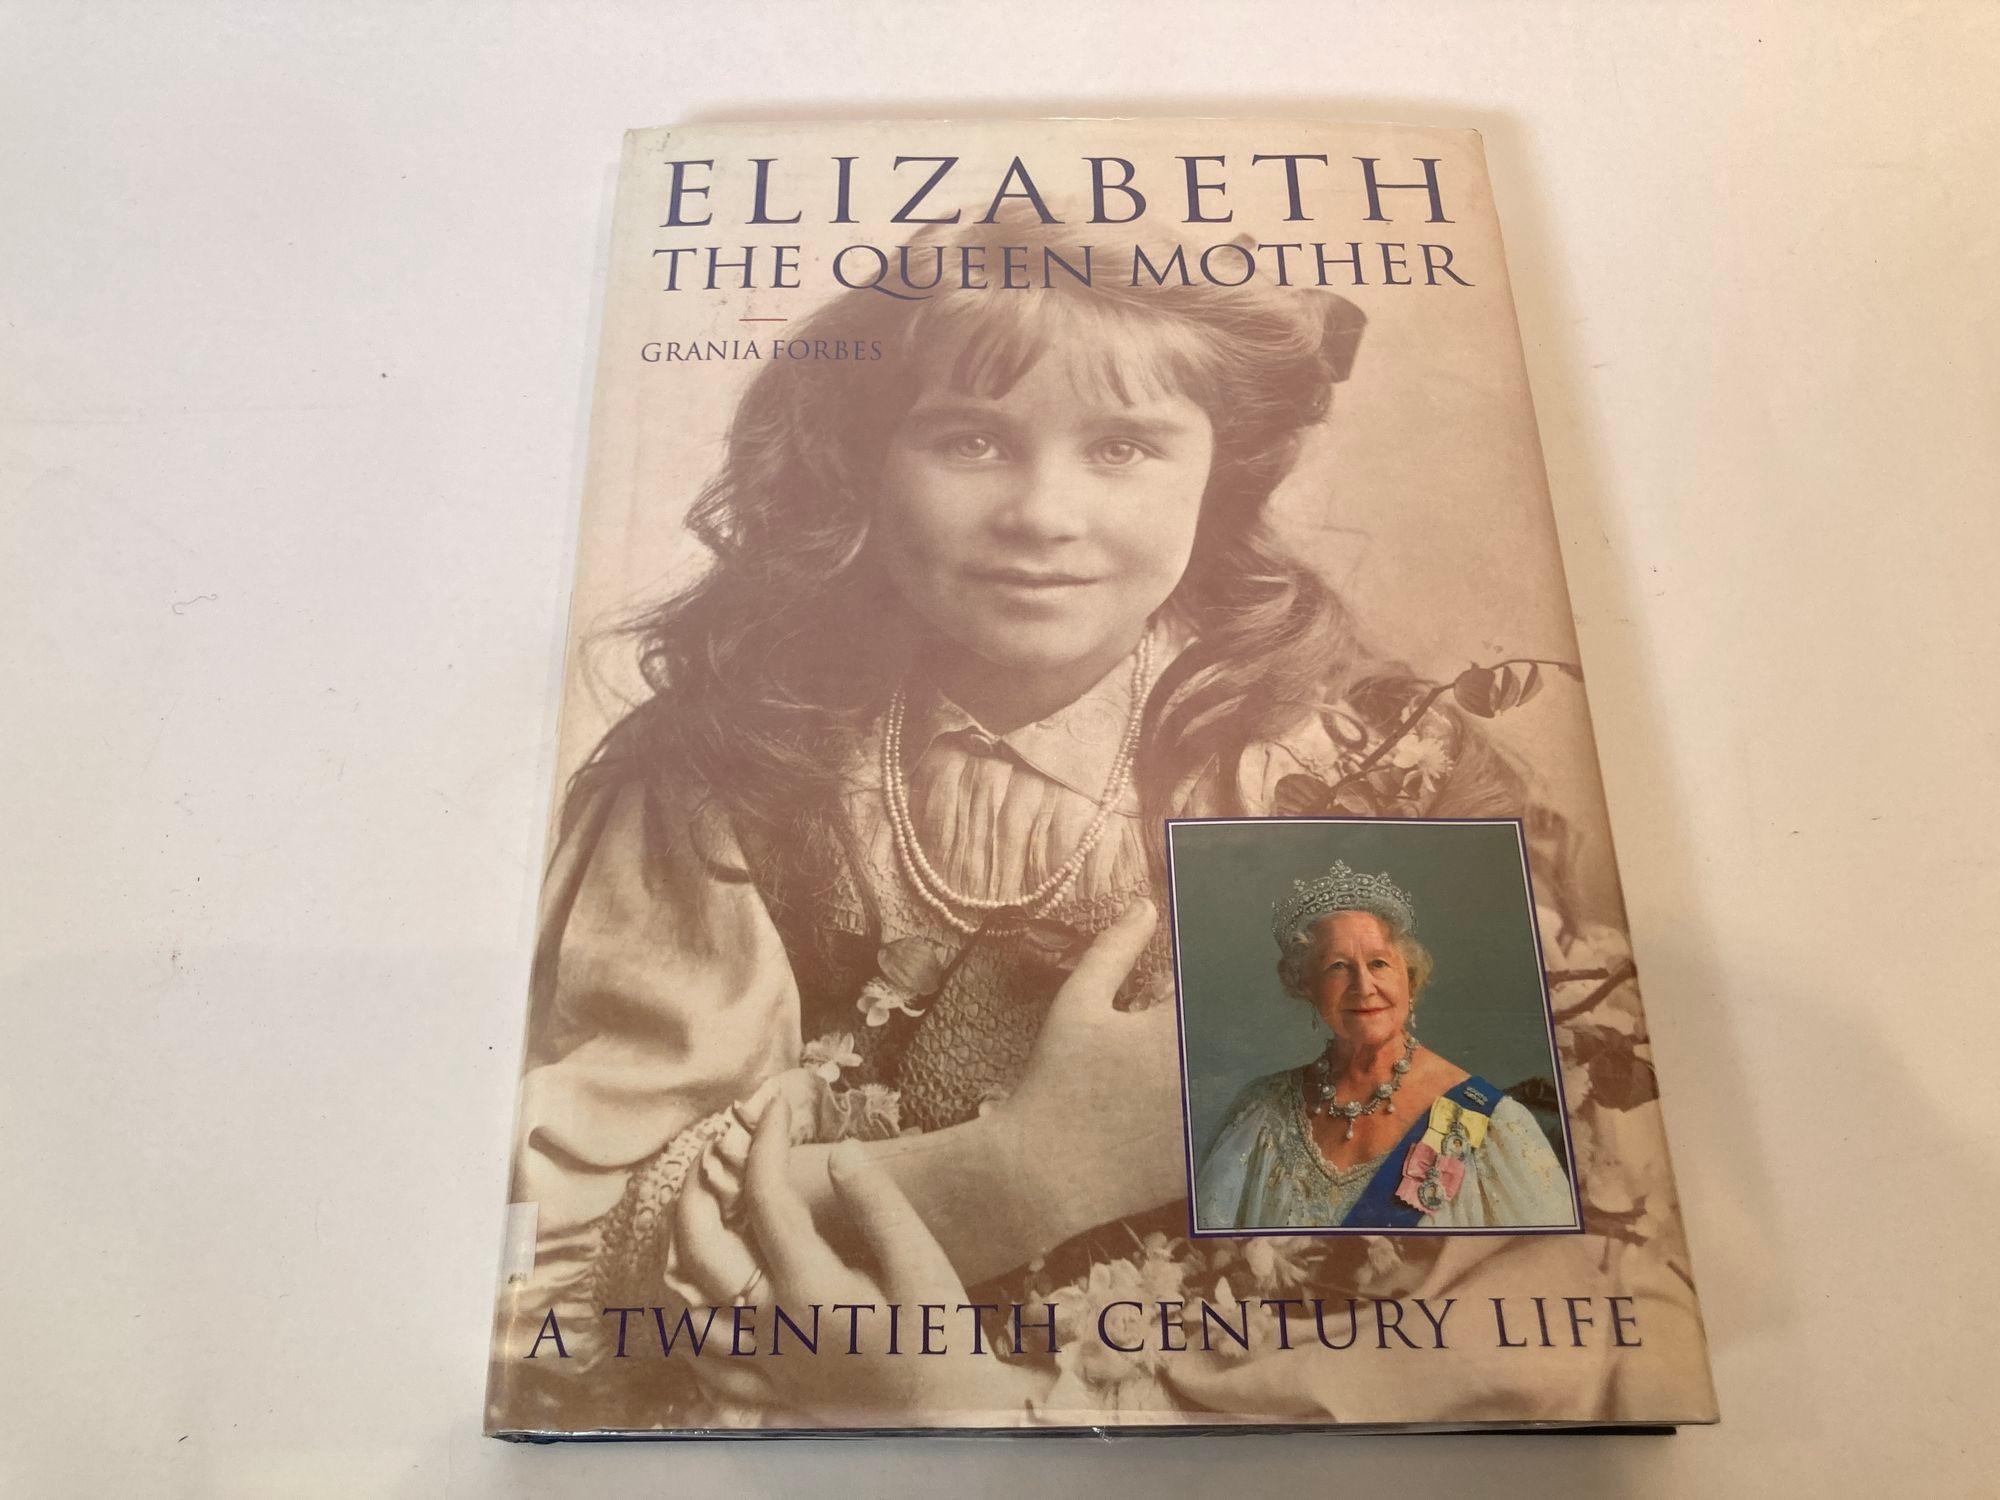 Elizabeth, the Queen Mother : A Twentieth Century Life by Grania Forbes.
Elizabeth, the Queen Mother is a celebration of the life of the nation''s most treasured Royal, providing a fascinating look at the events of the 20th century, as well as an